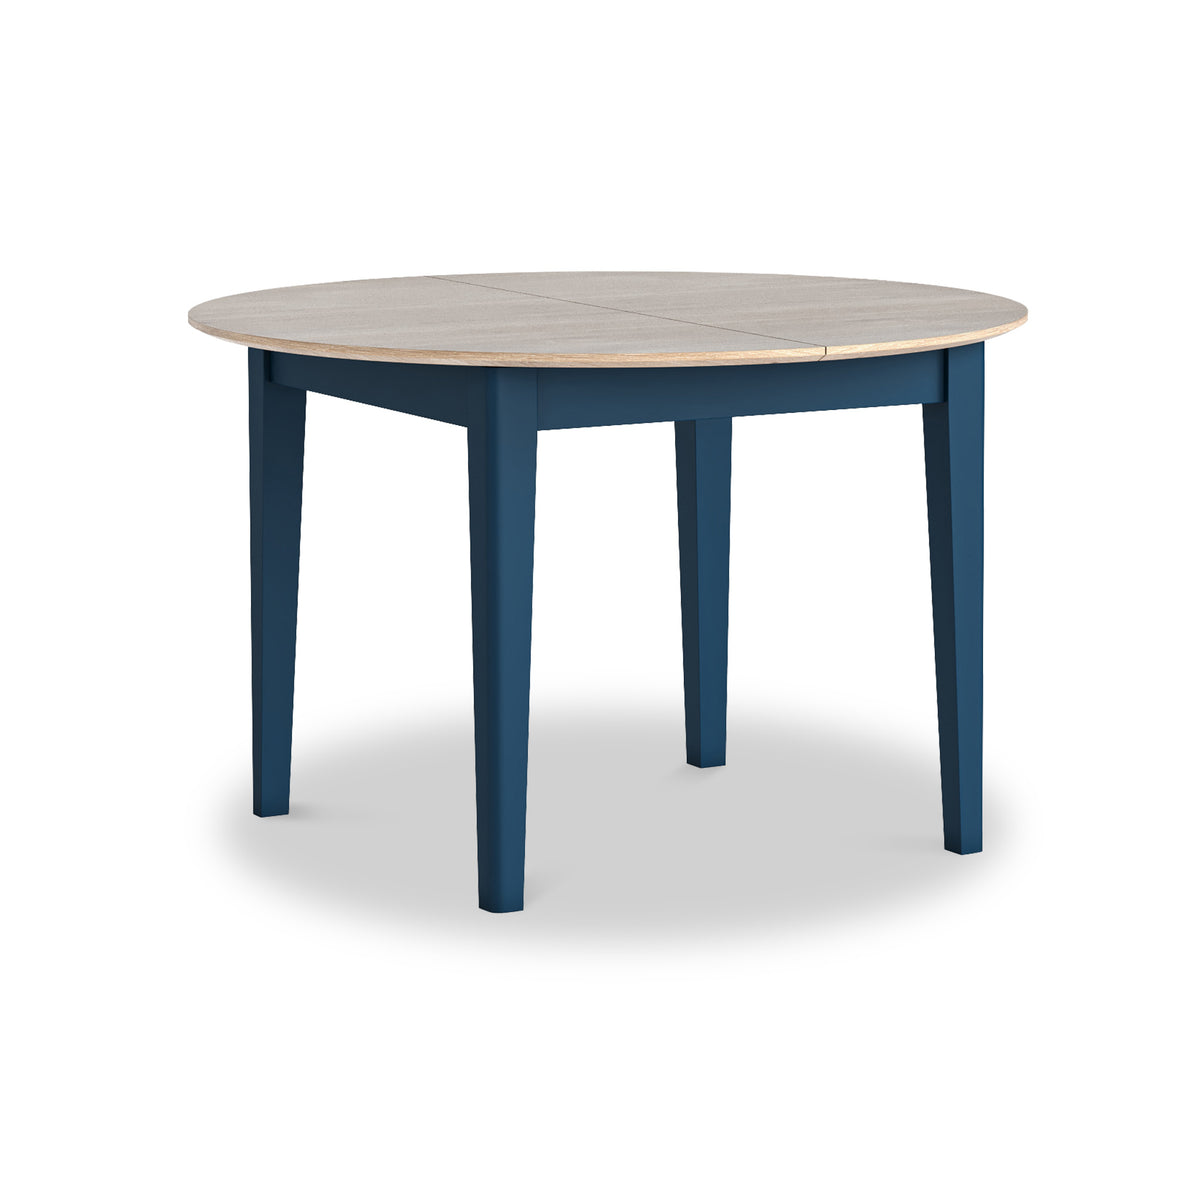 Penrose Navy Blue Extending Round Dining Table from Roseland Furniture